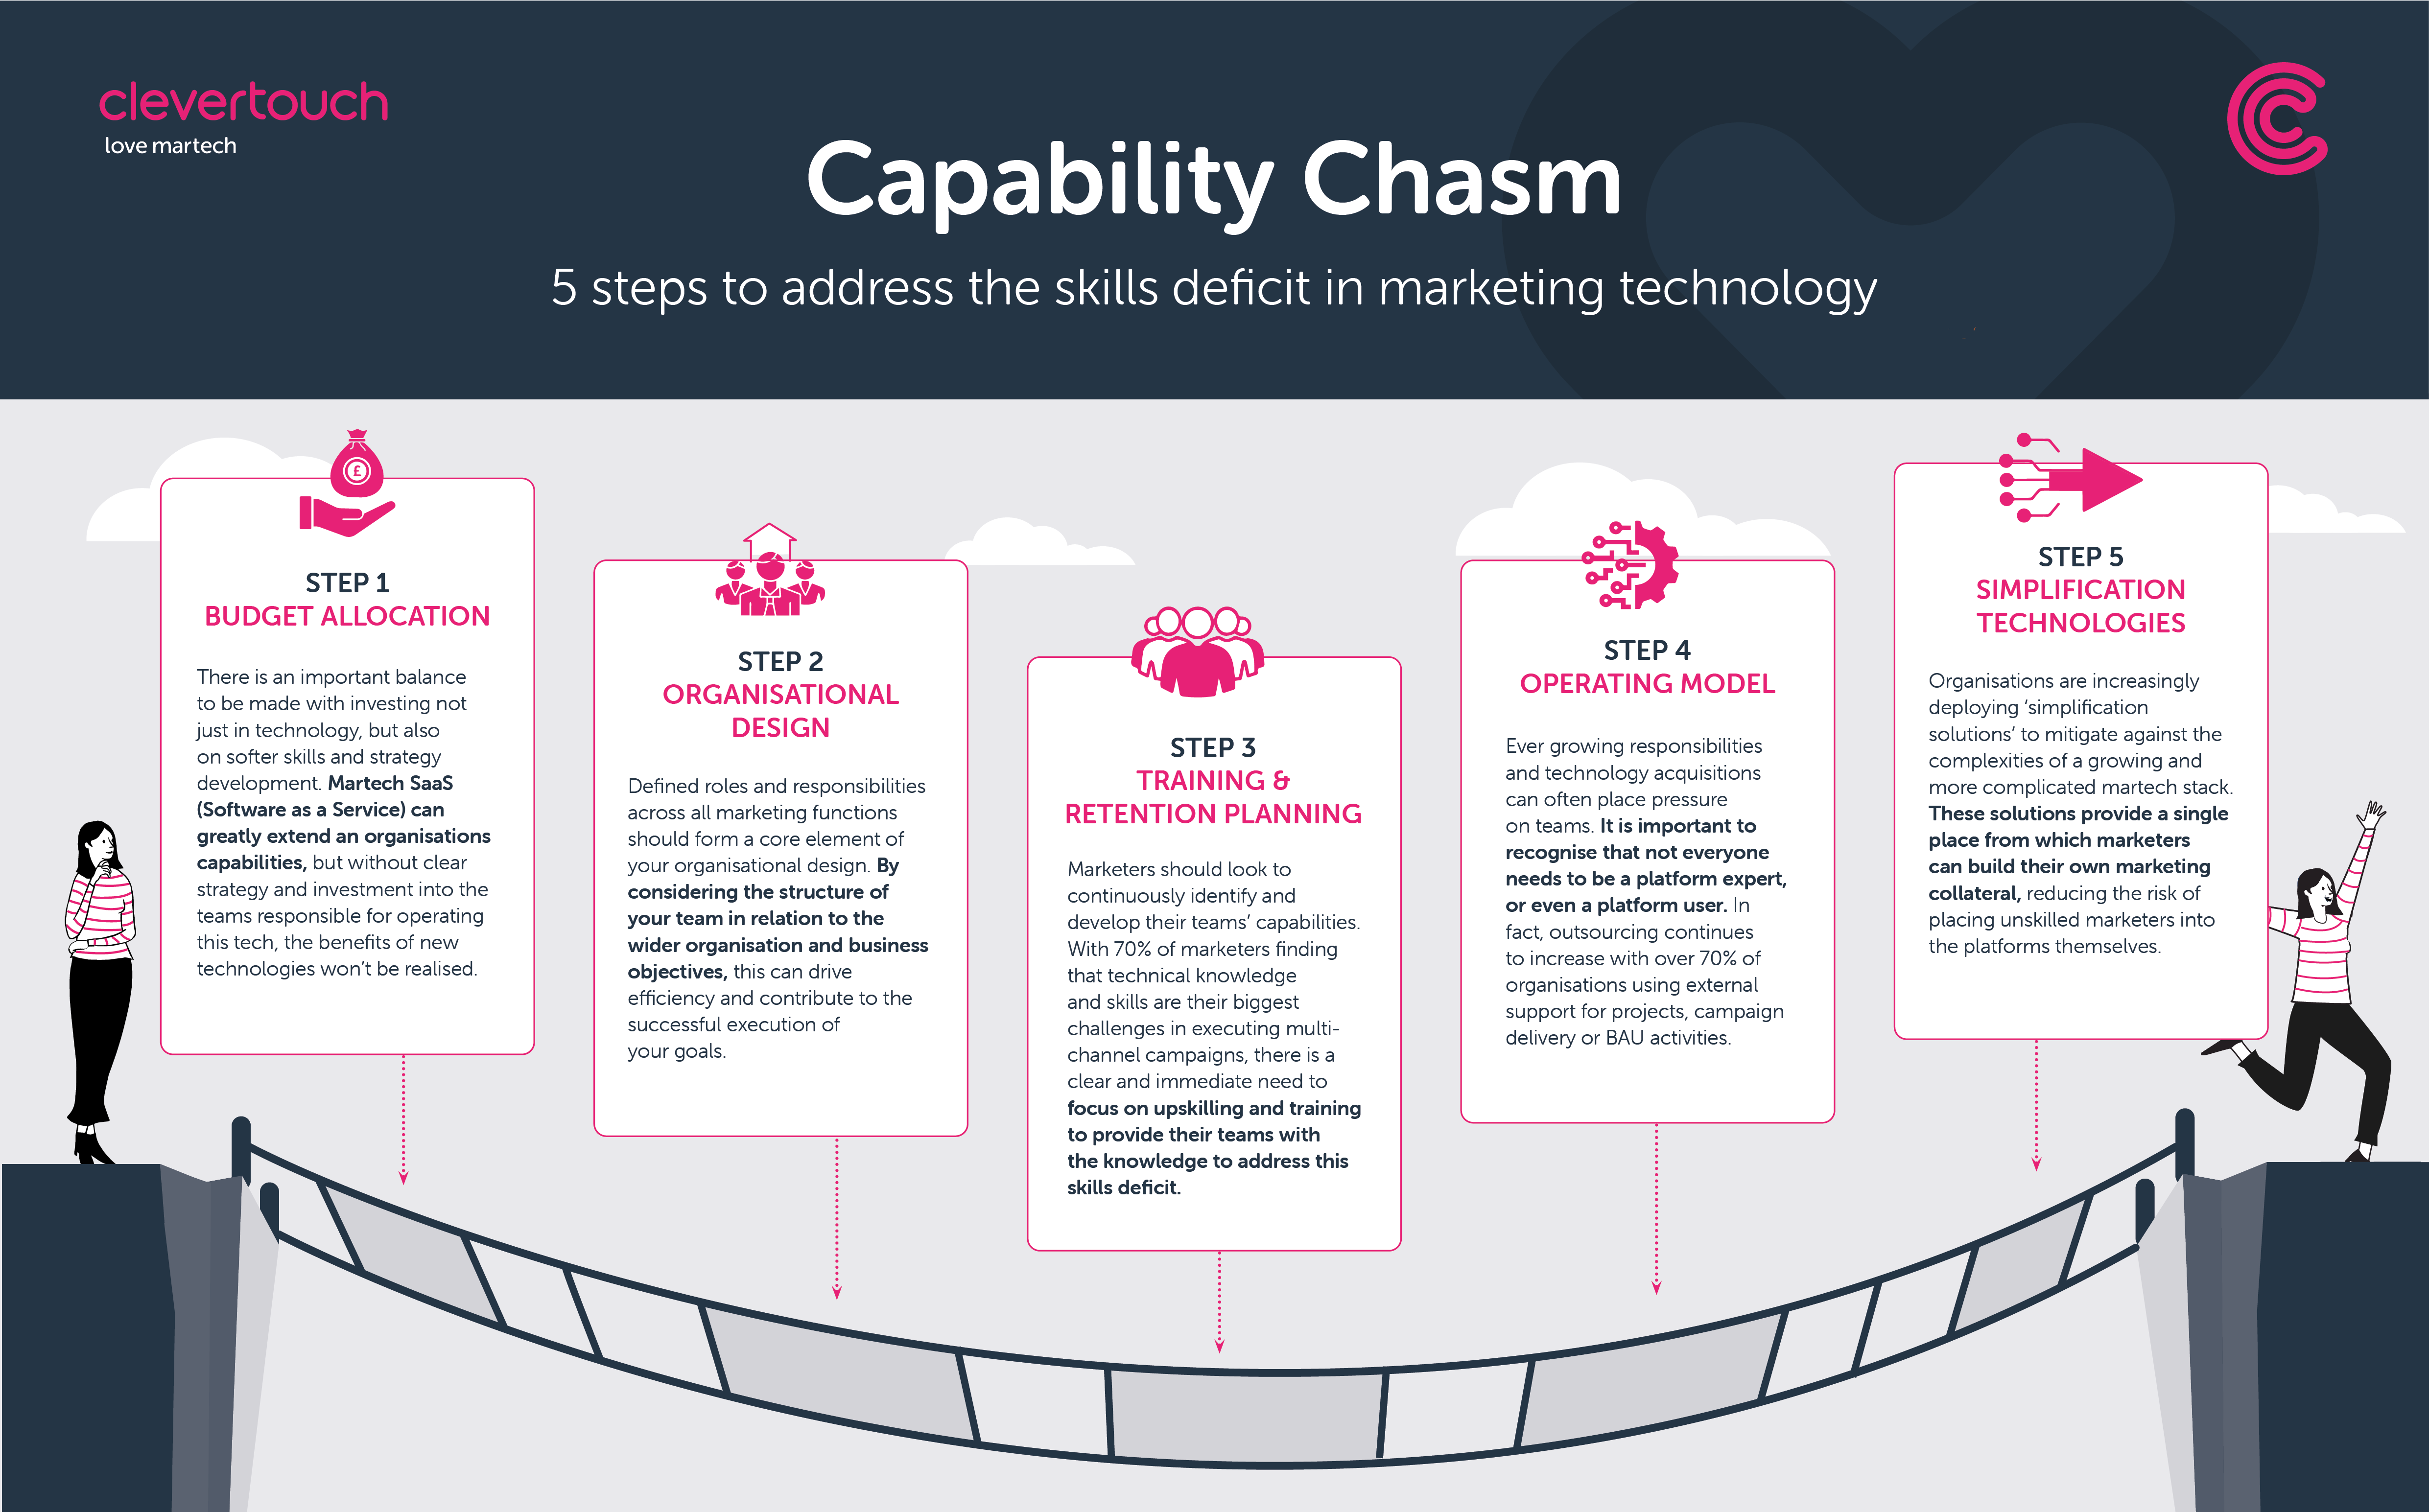 Capability Chasm infographic from Clevertouch